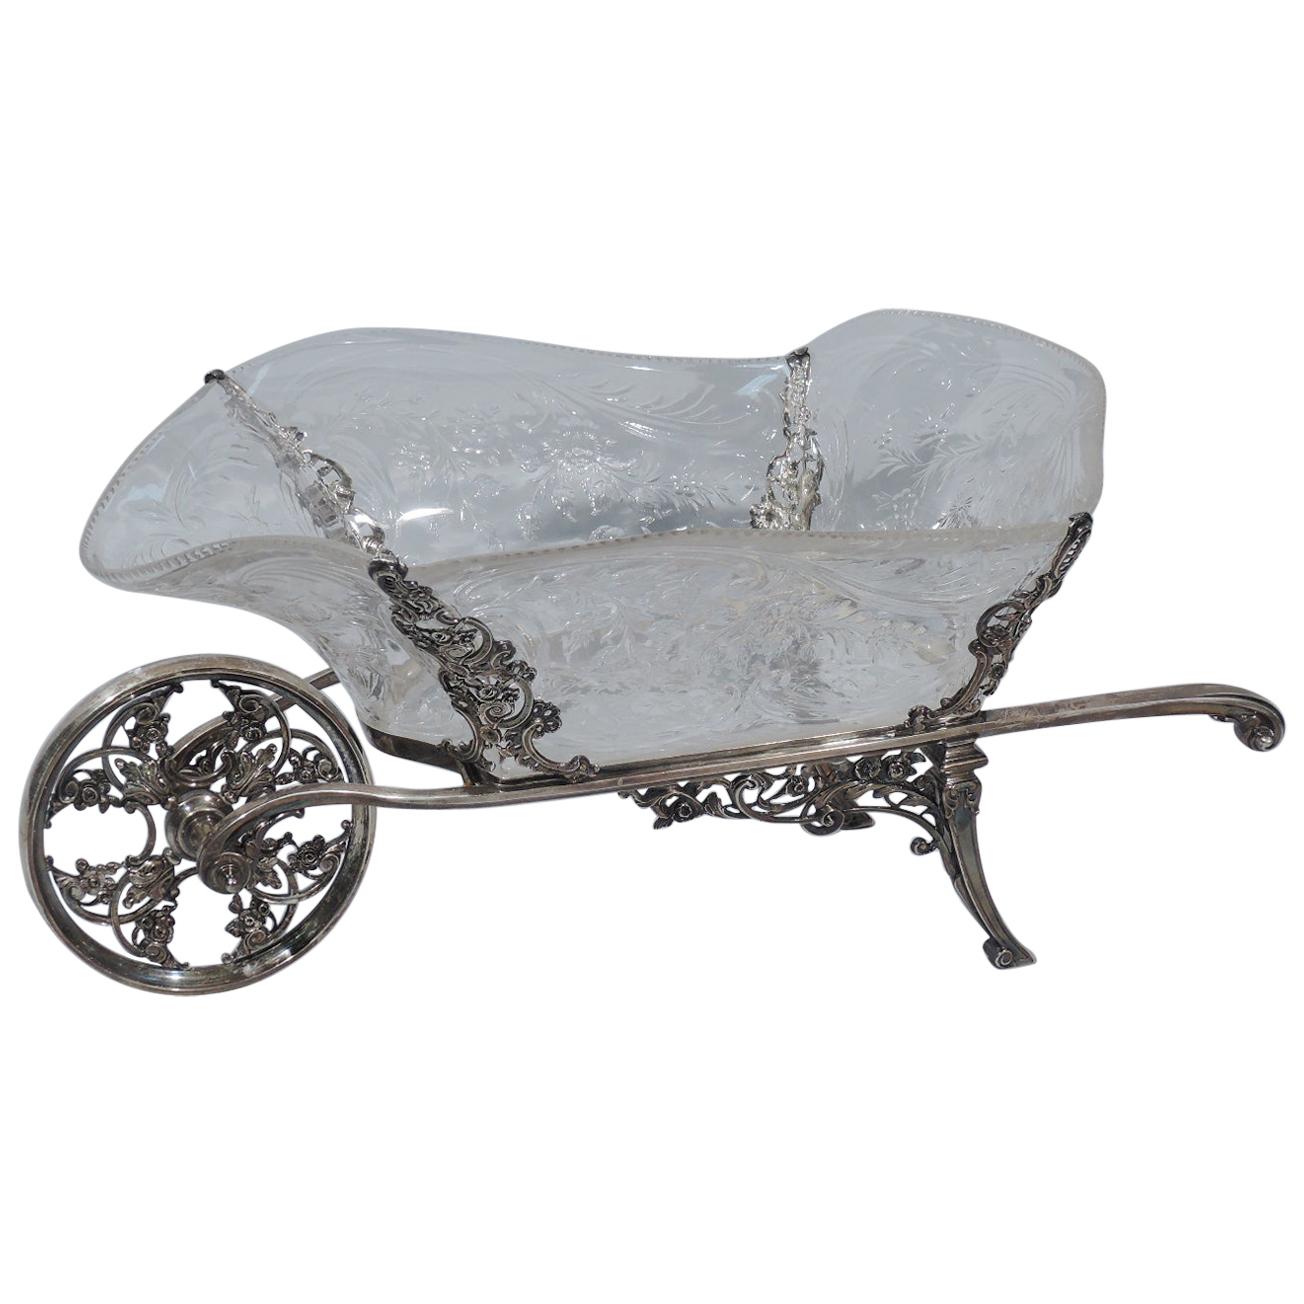 Antique English Sterling Silver and Crystal Wheelbarrow Centerpiece by Comyns